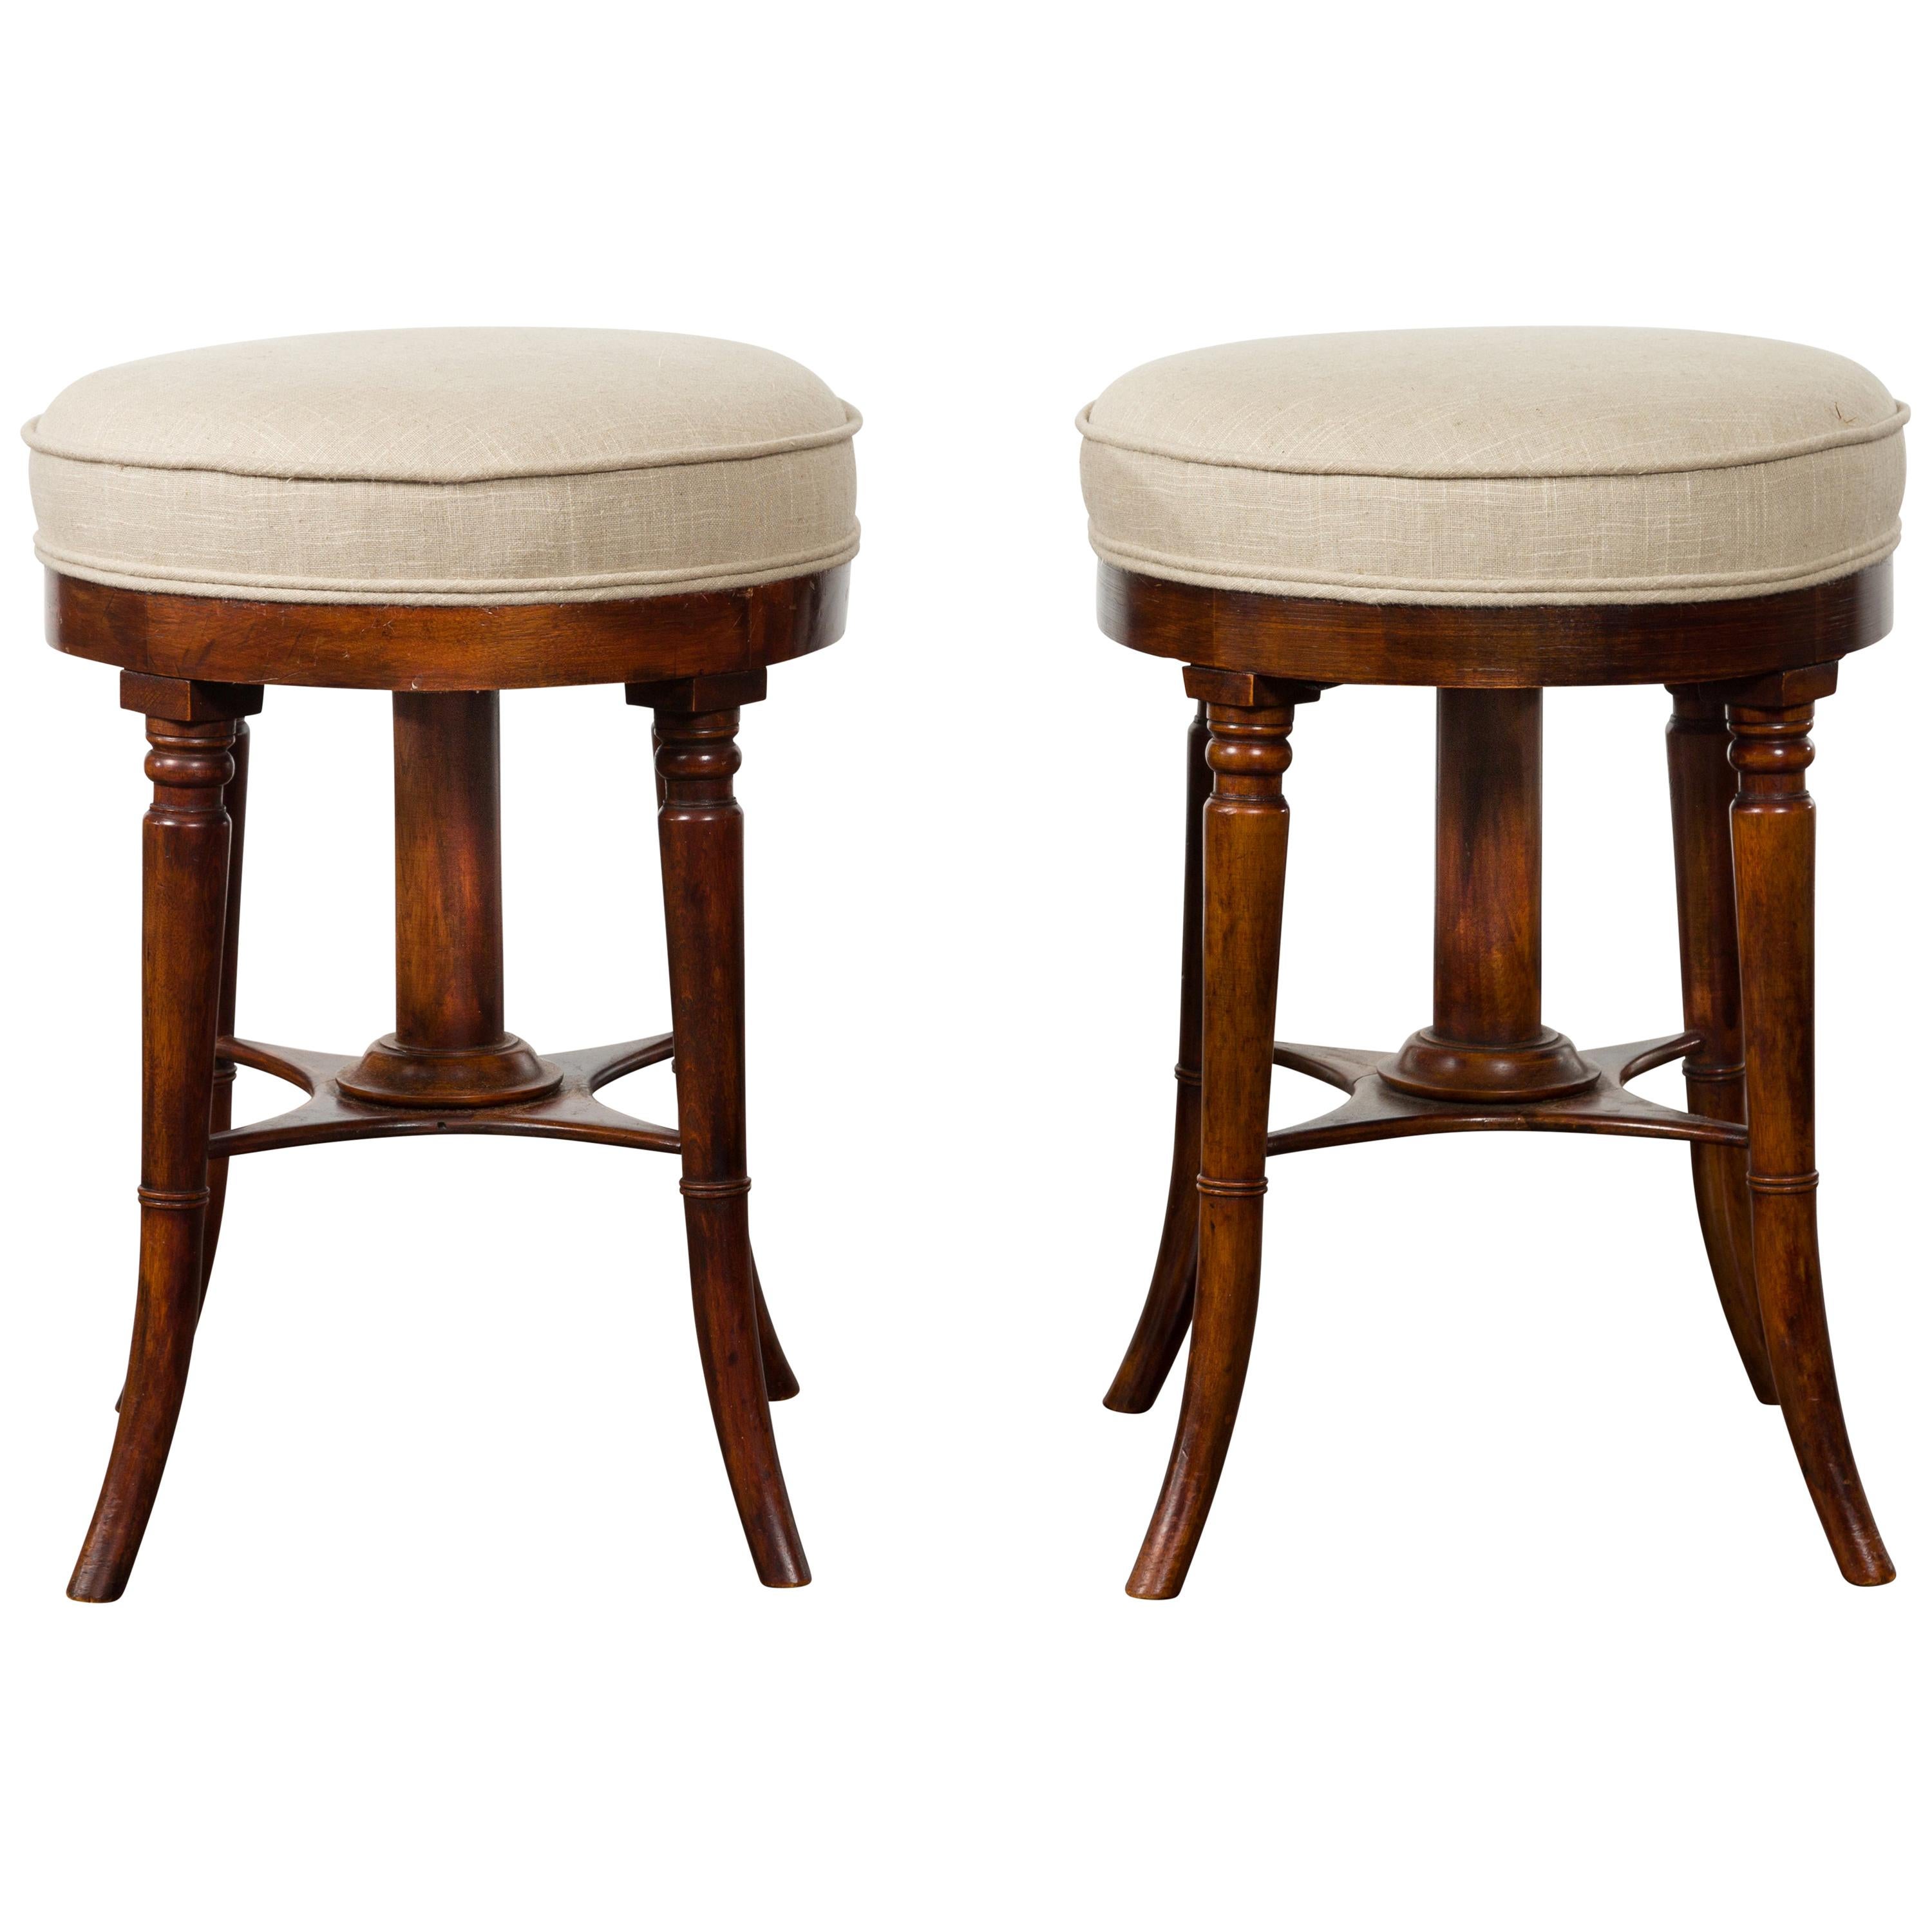 Pair of English 1920s Mahogany Stools with Turned Legs and New Upholstery For Sale